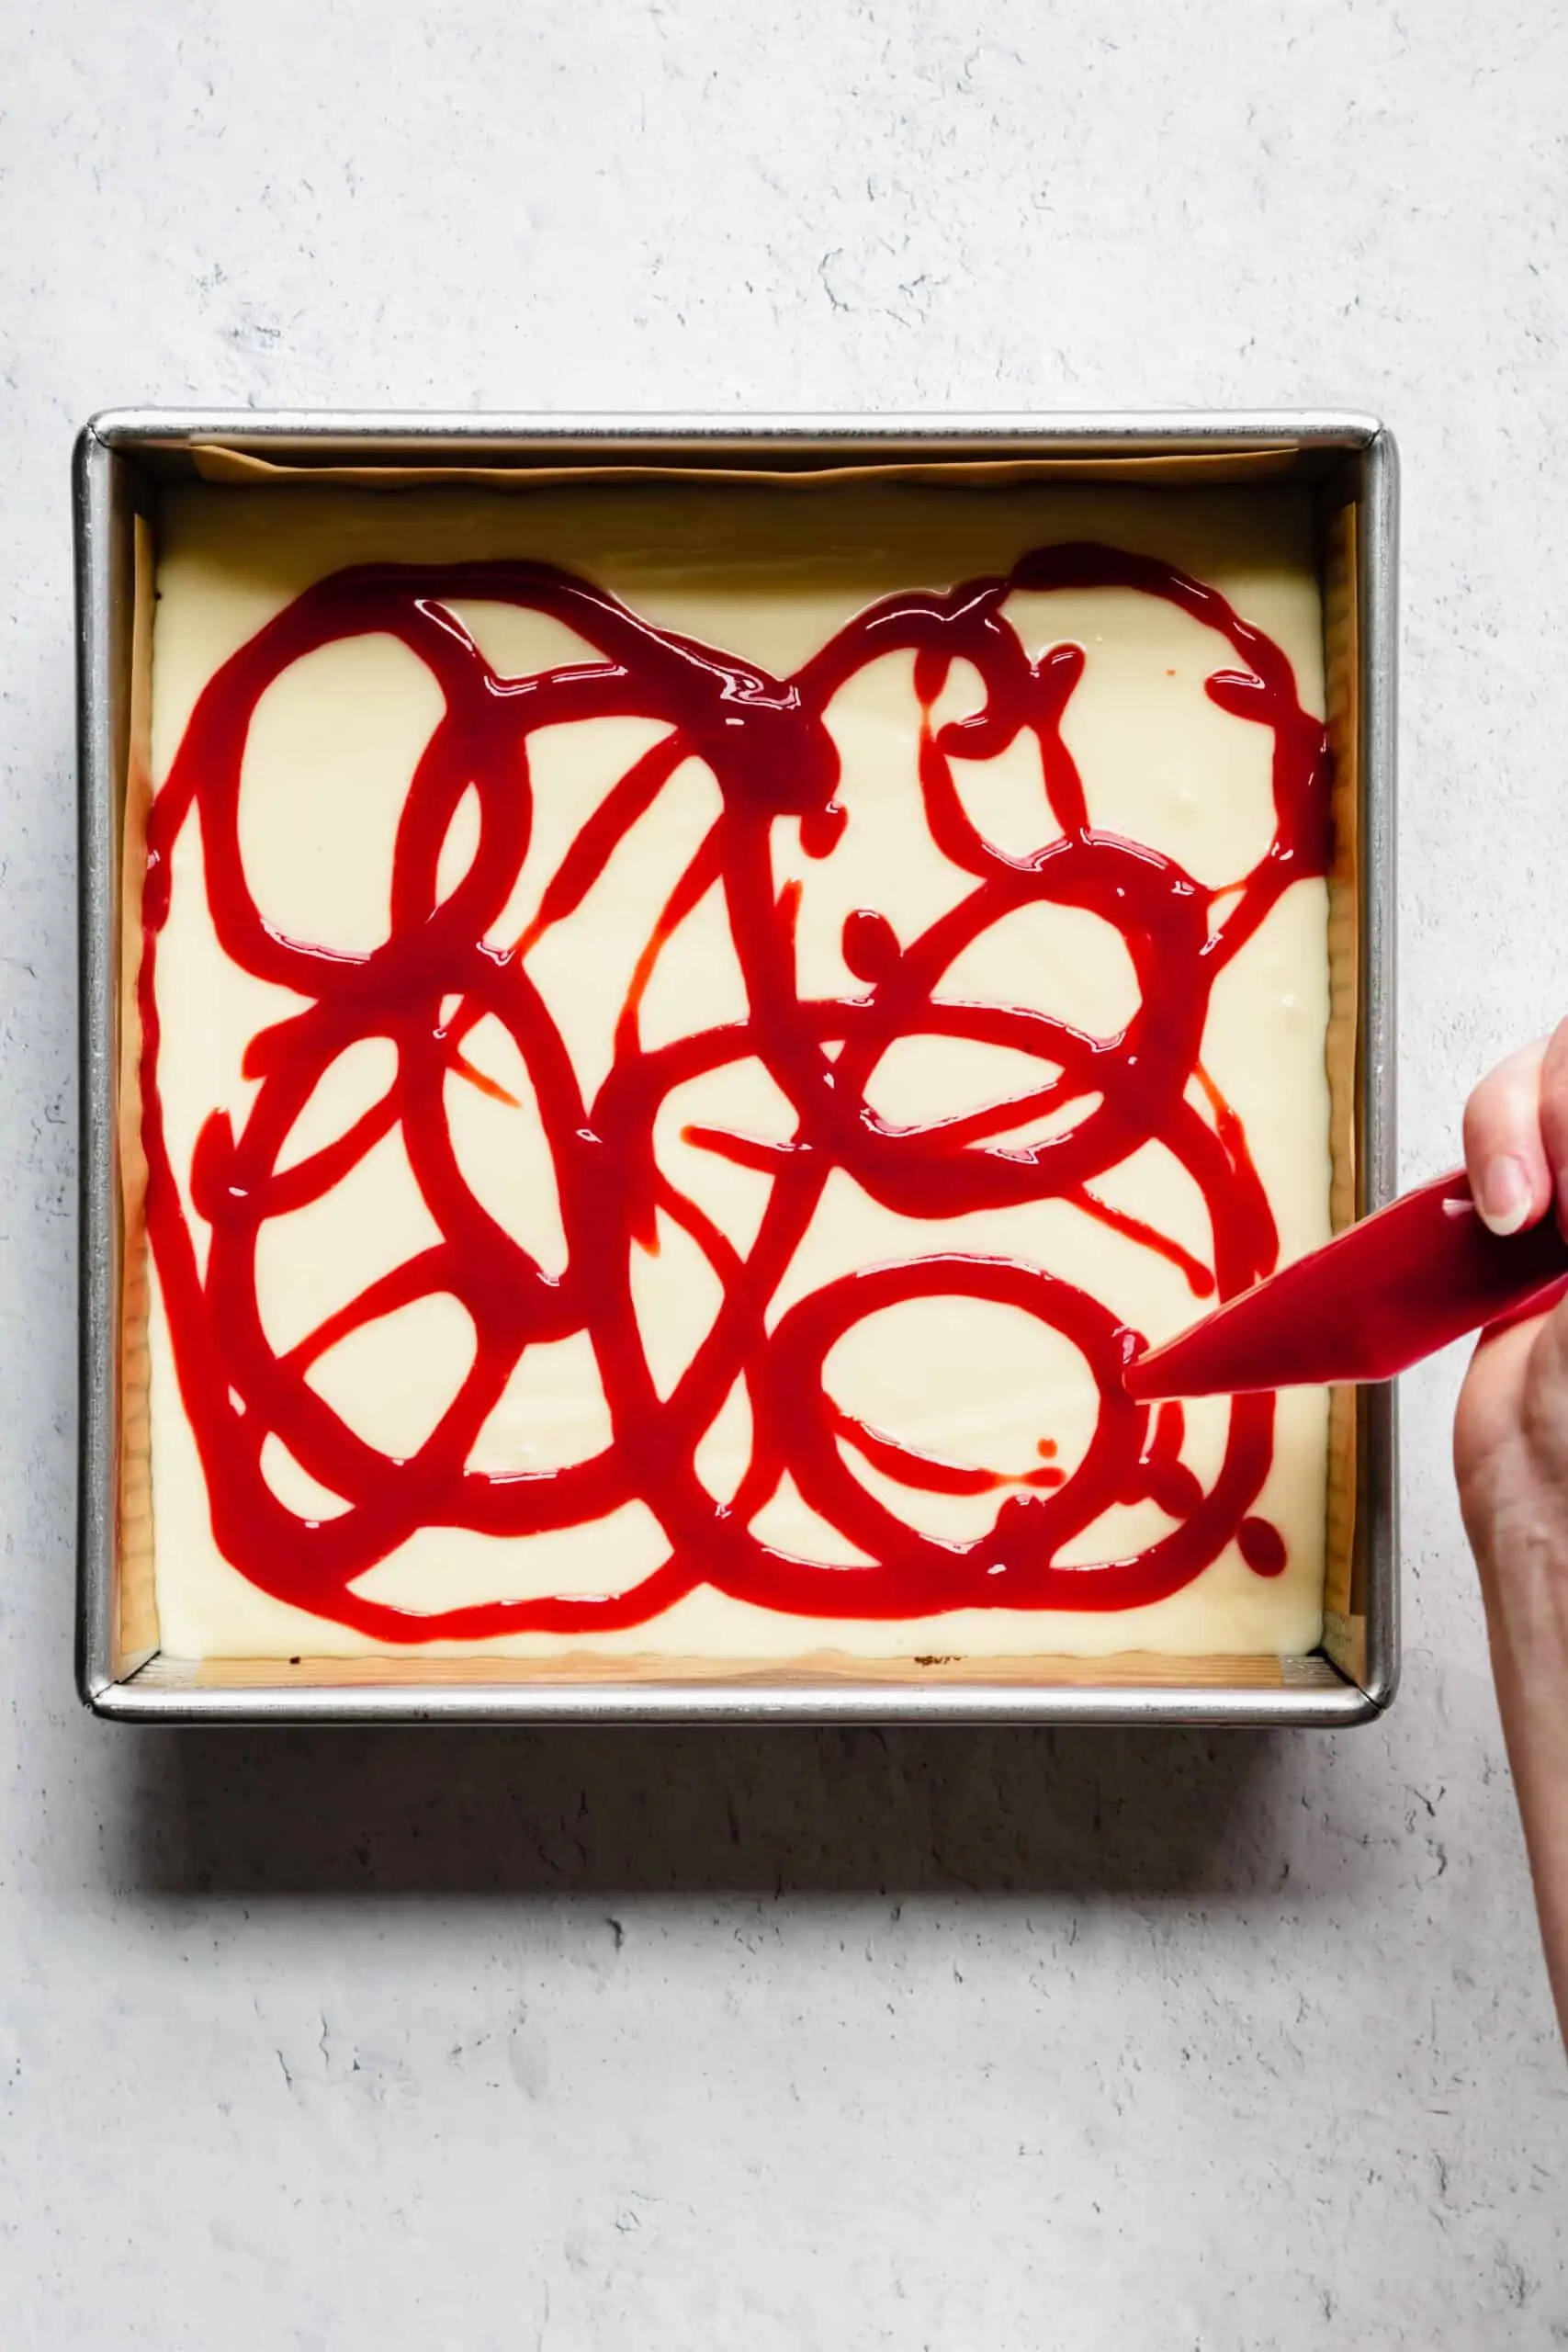 Raspberry puree being added to cheesecake in squiggles with a piping bag.